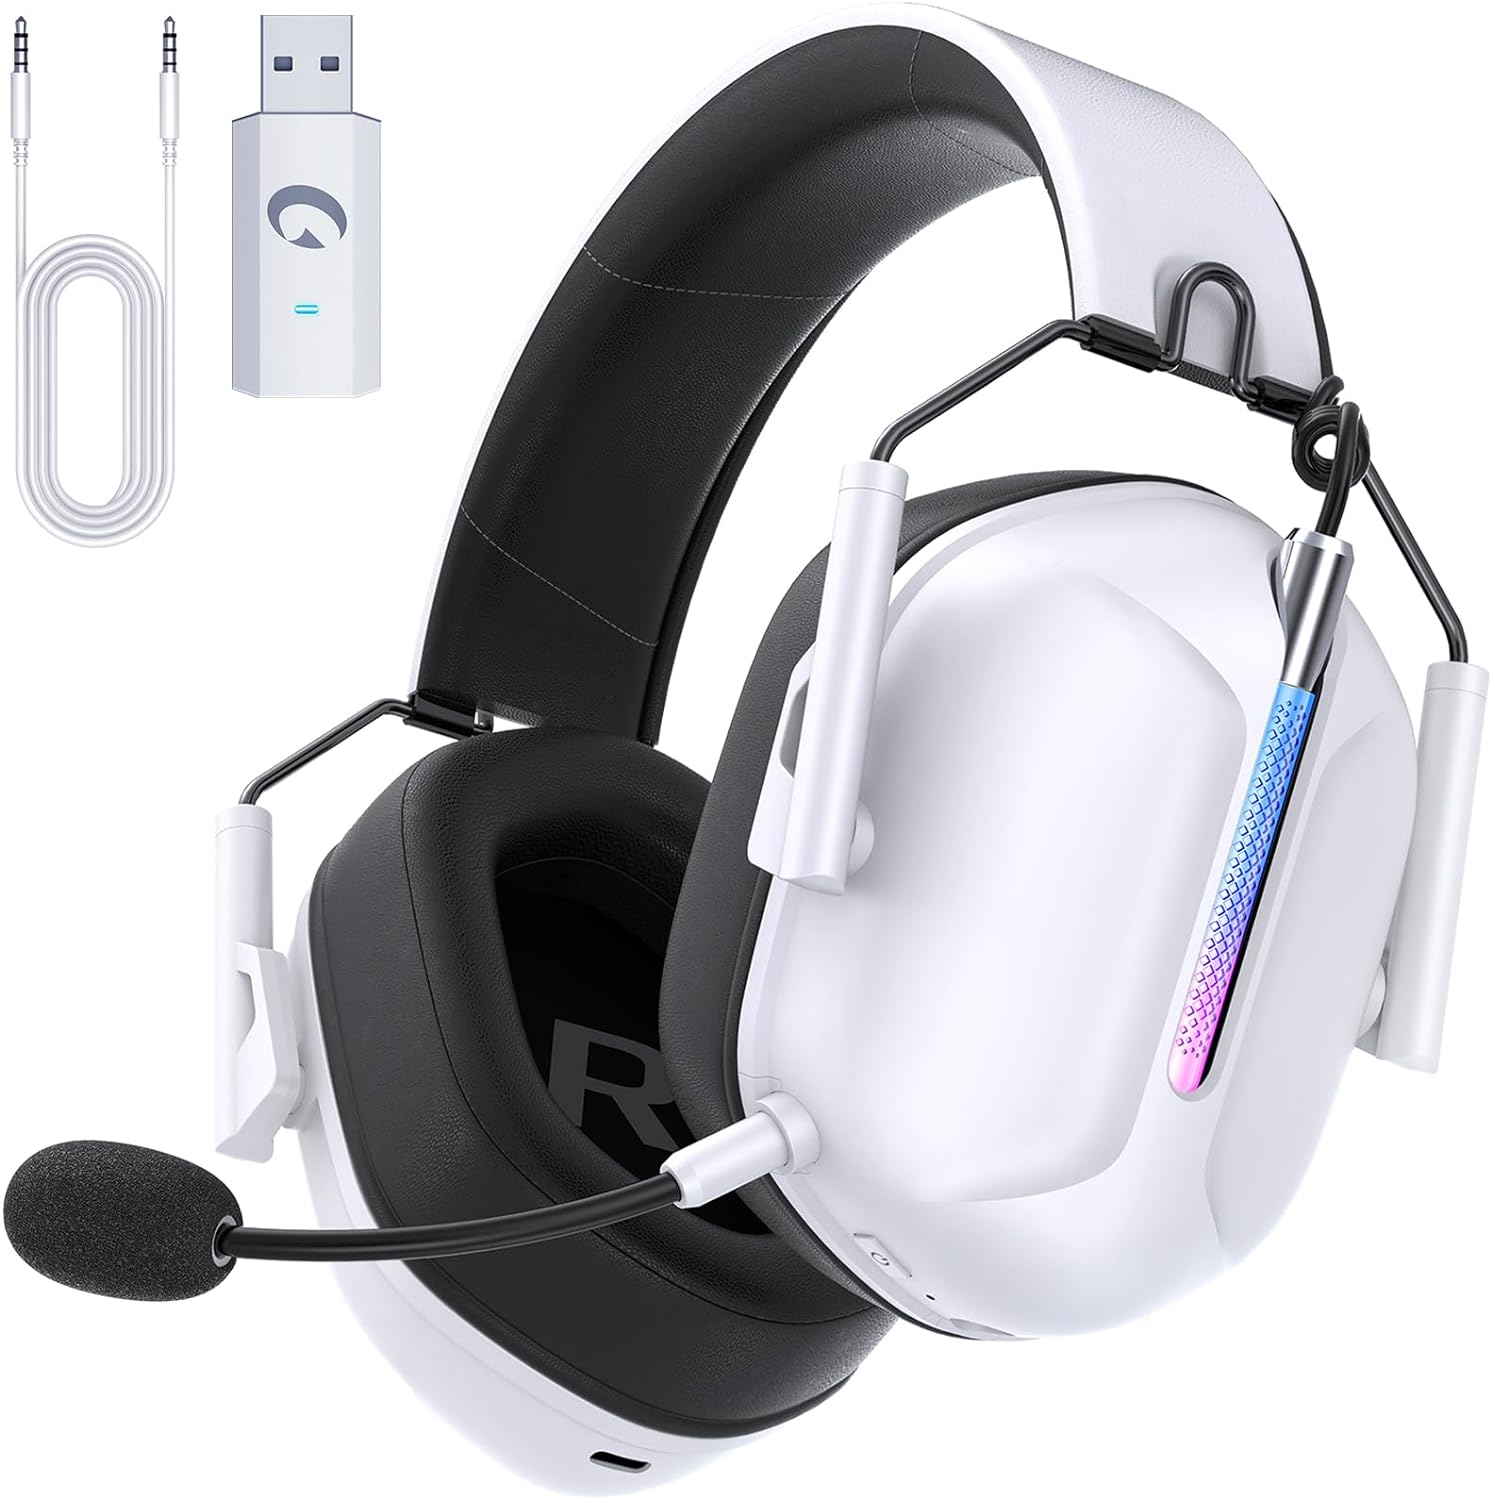 Deal Alert: Gvyugke Wireless Gaming Headset for PS5, PS4, PC - 40% Off!